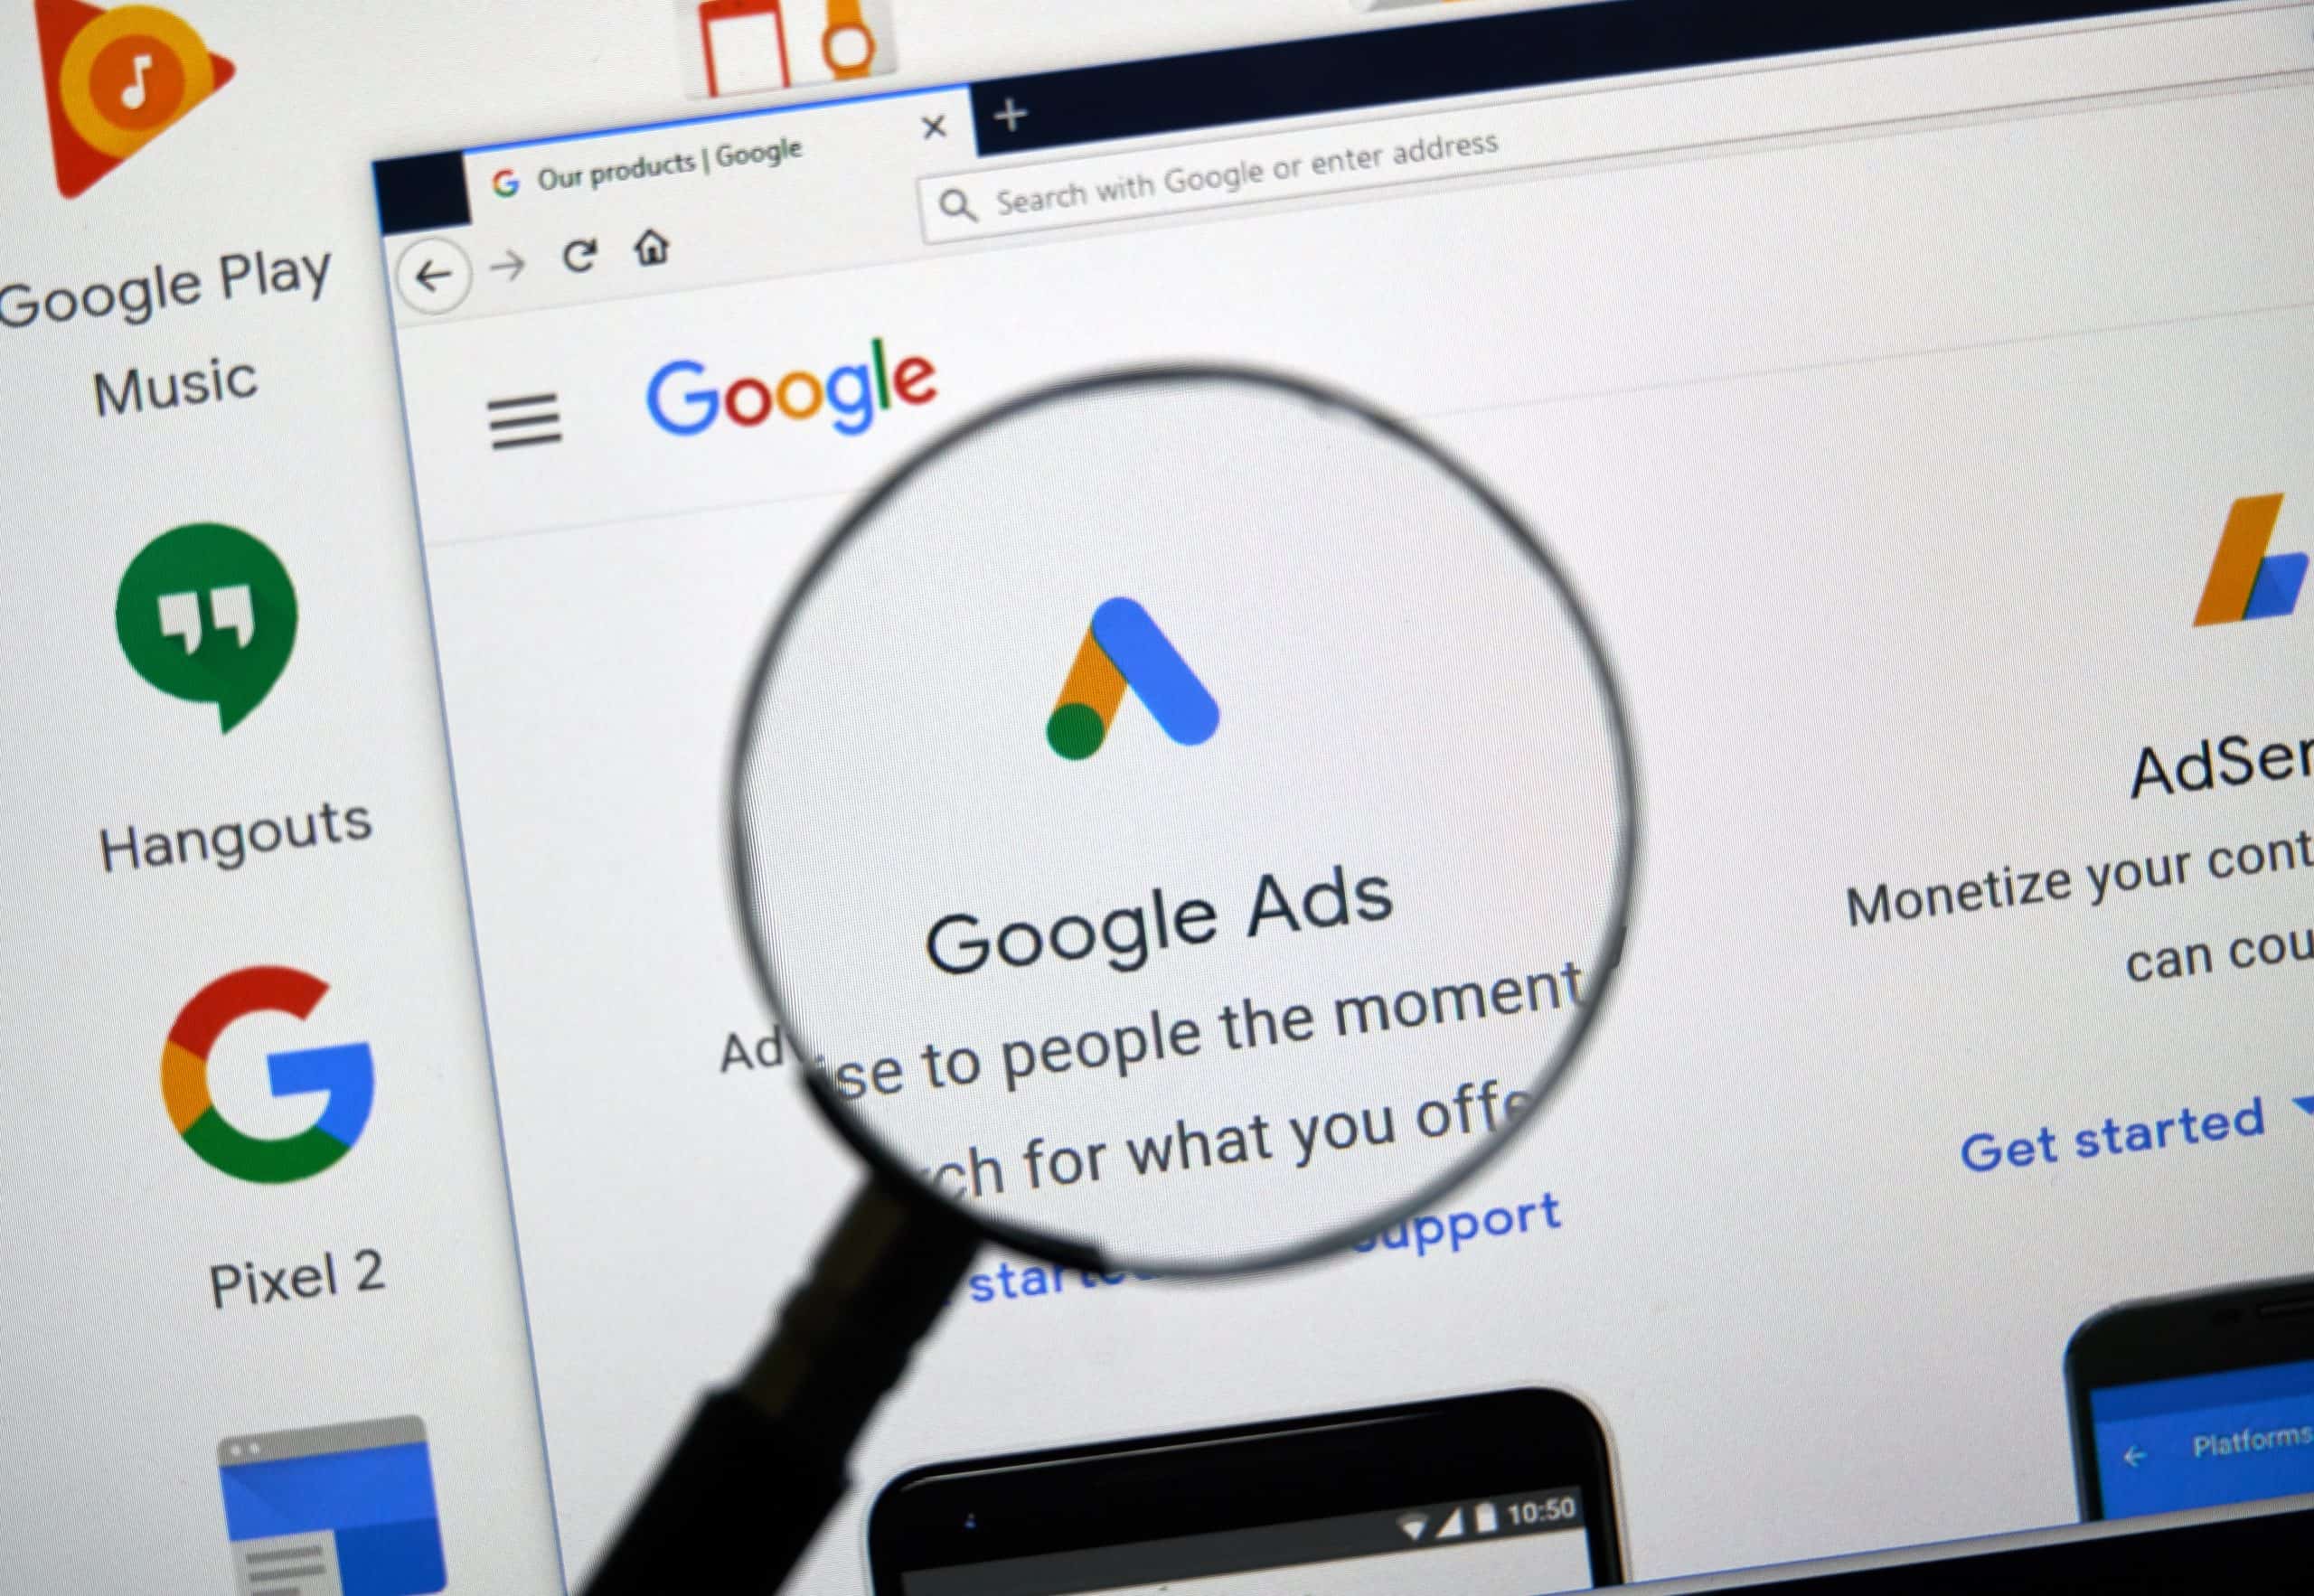 From Keywords To Conversions: How To Build Successful Google Ad Campaigns